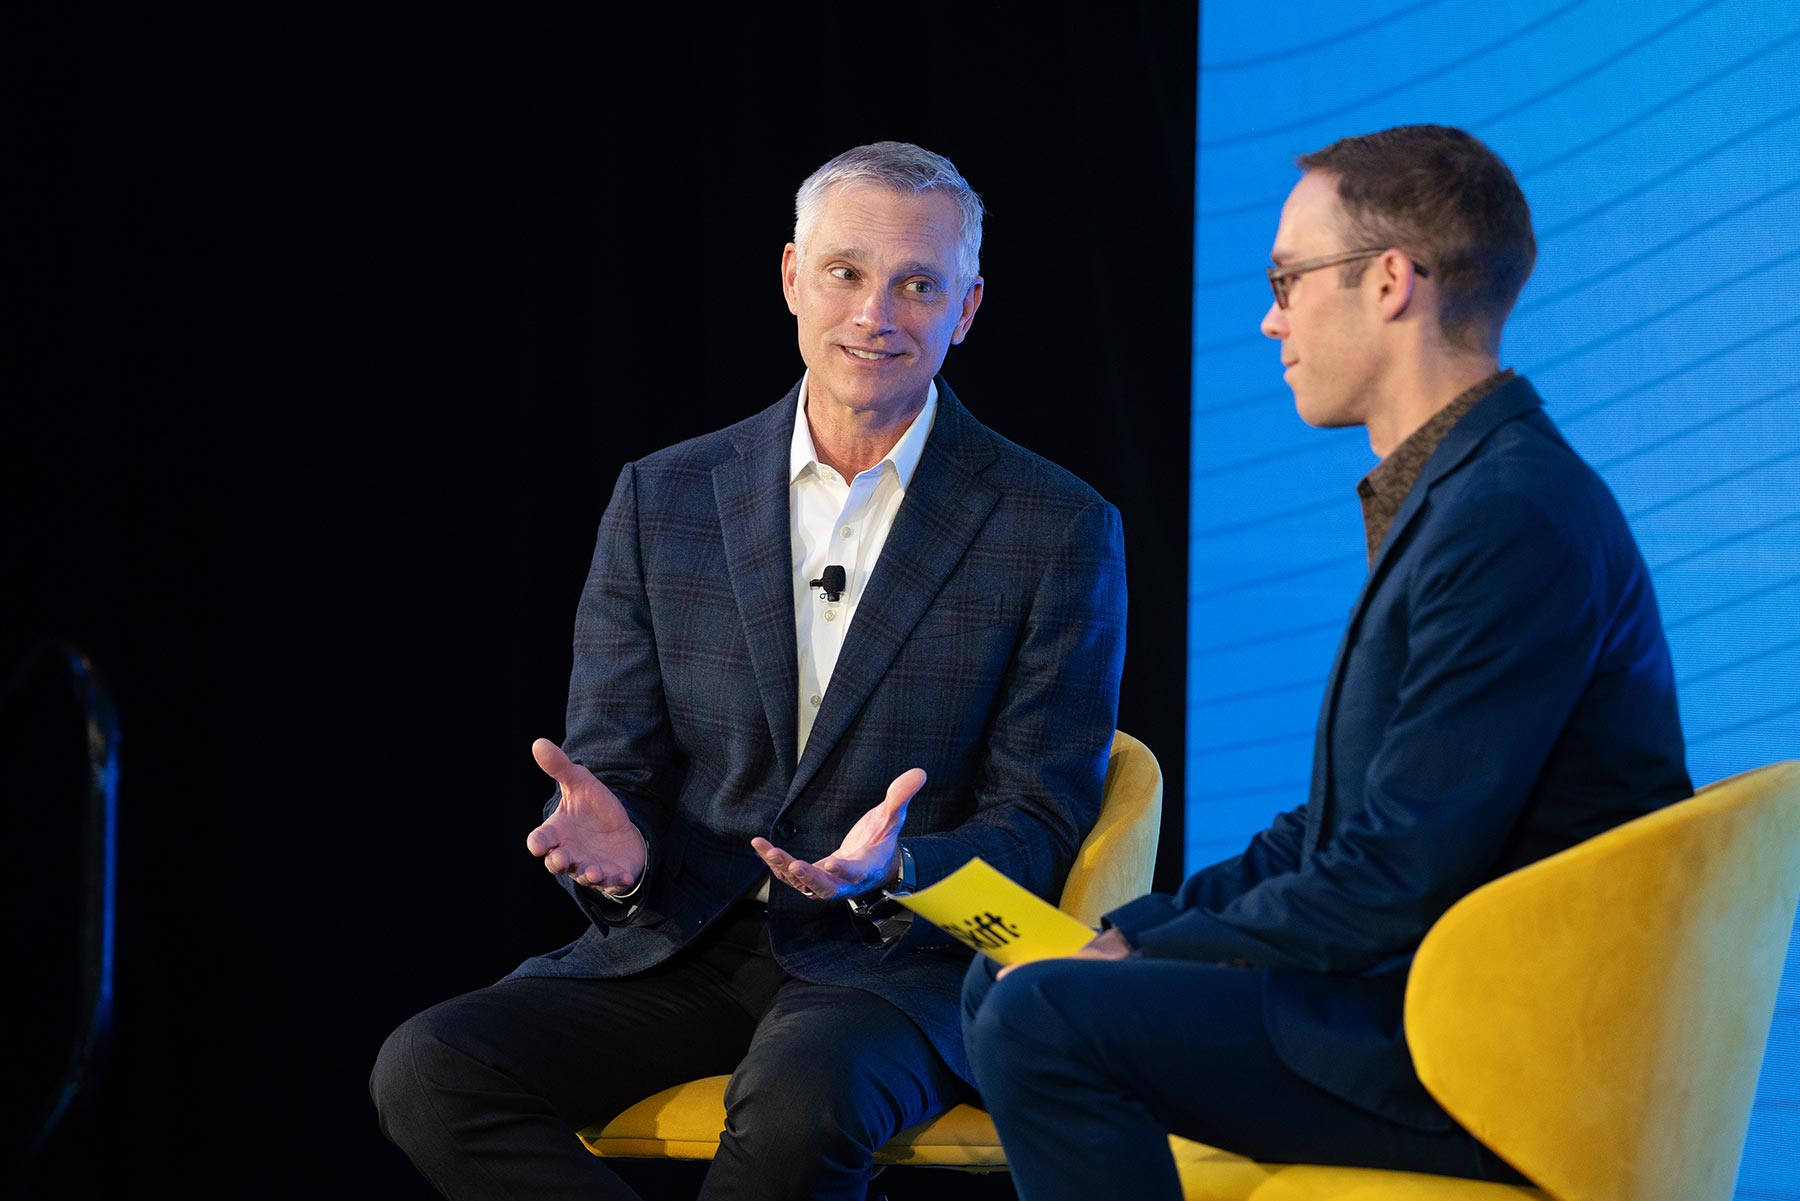 Robert Isom, American Airlines CEO in conversation with Skift Airline Weekly editor Edward Russell at Skift Aviation Forum. Source: Skift 